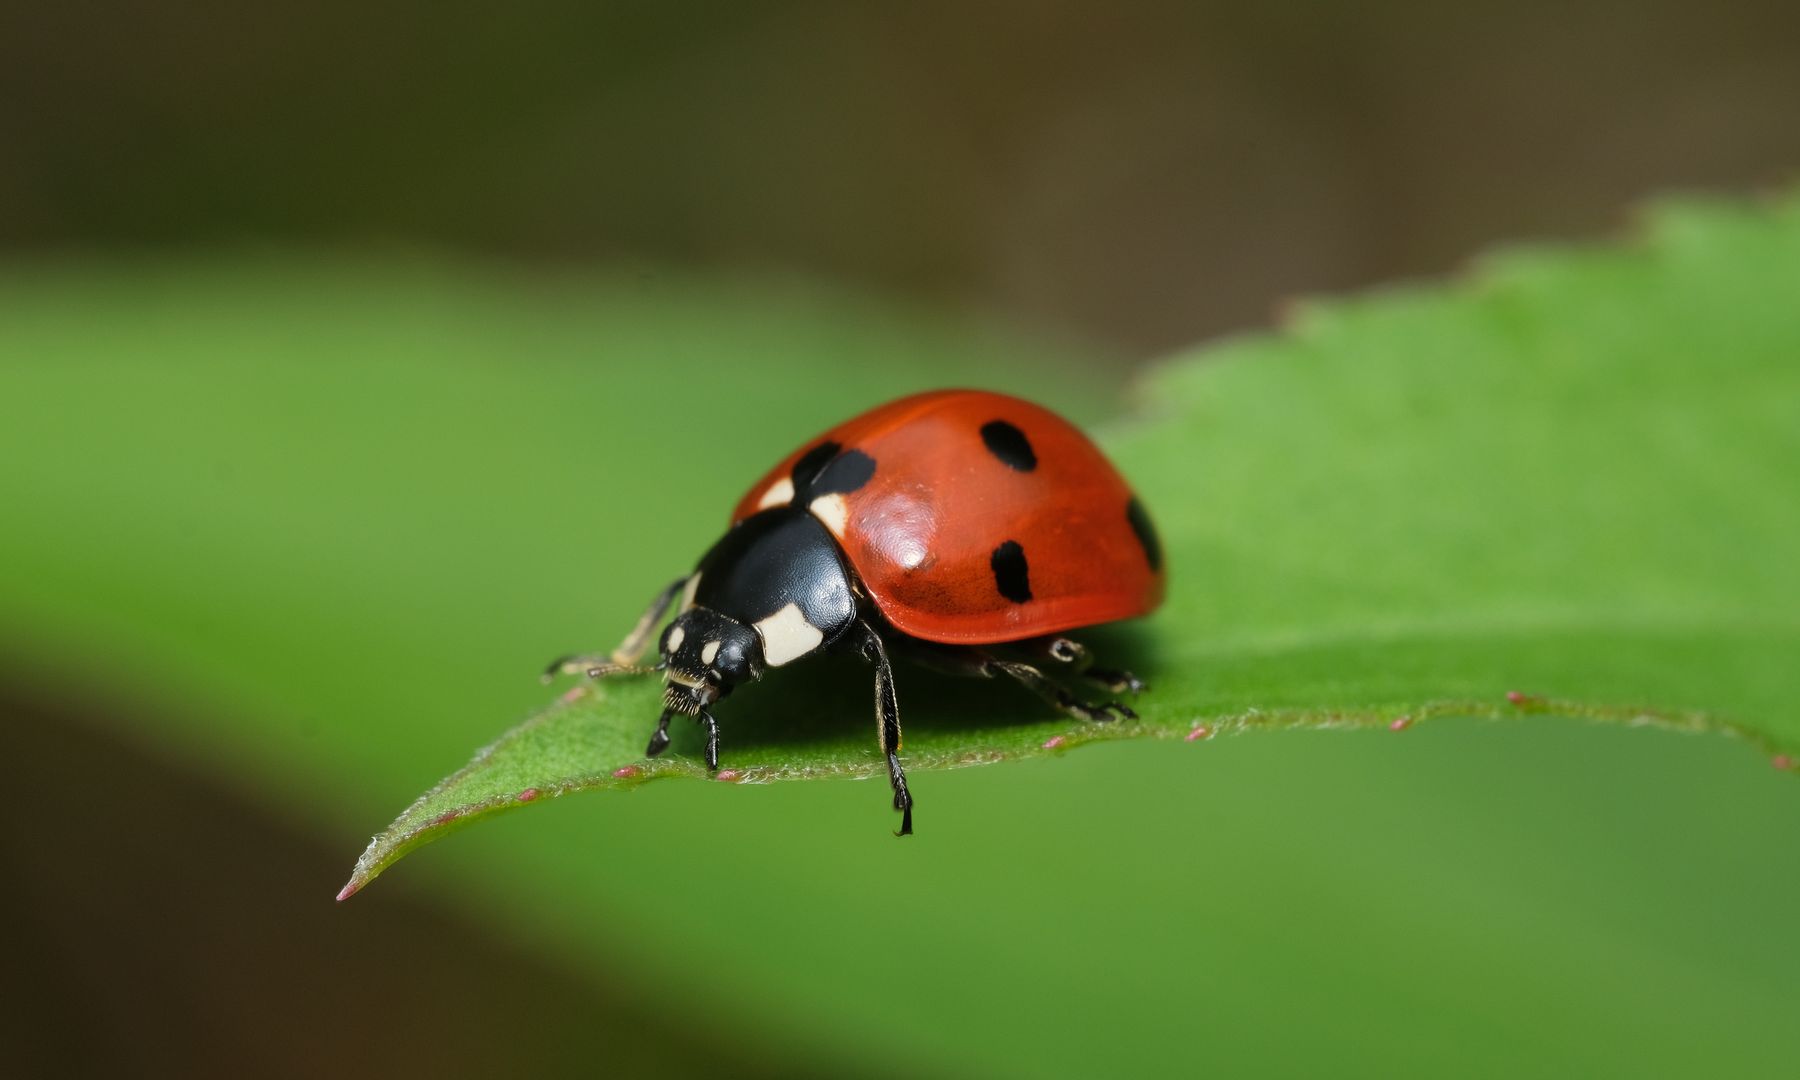 Attracting ladybugs: A practical, eco-friendly strategy to guard